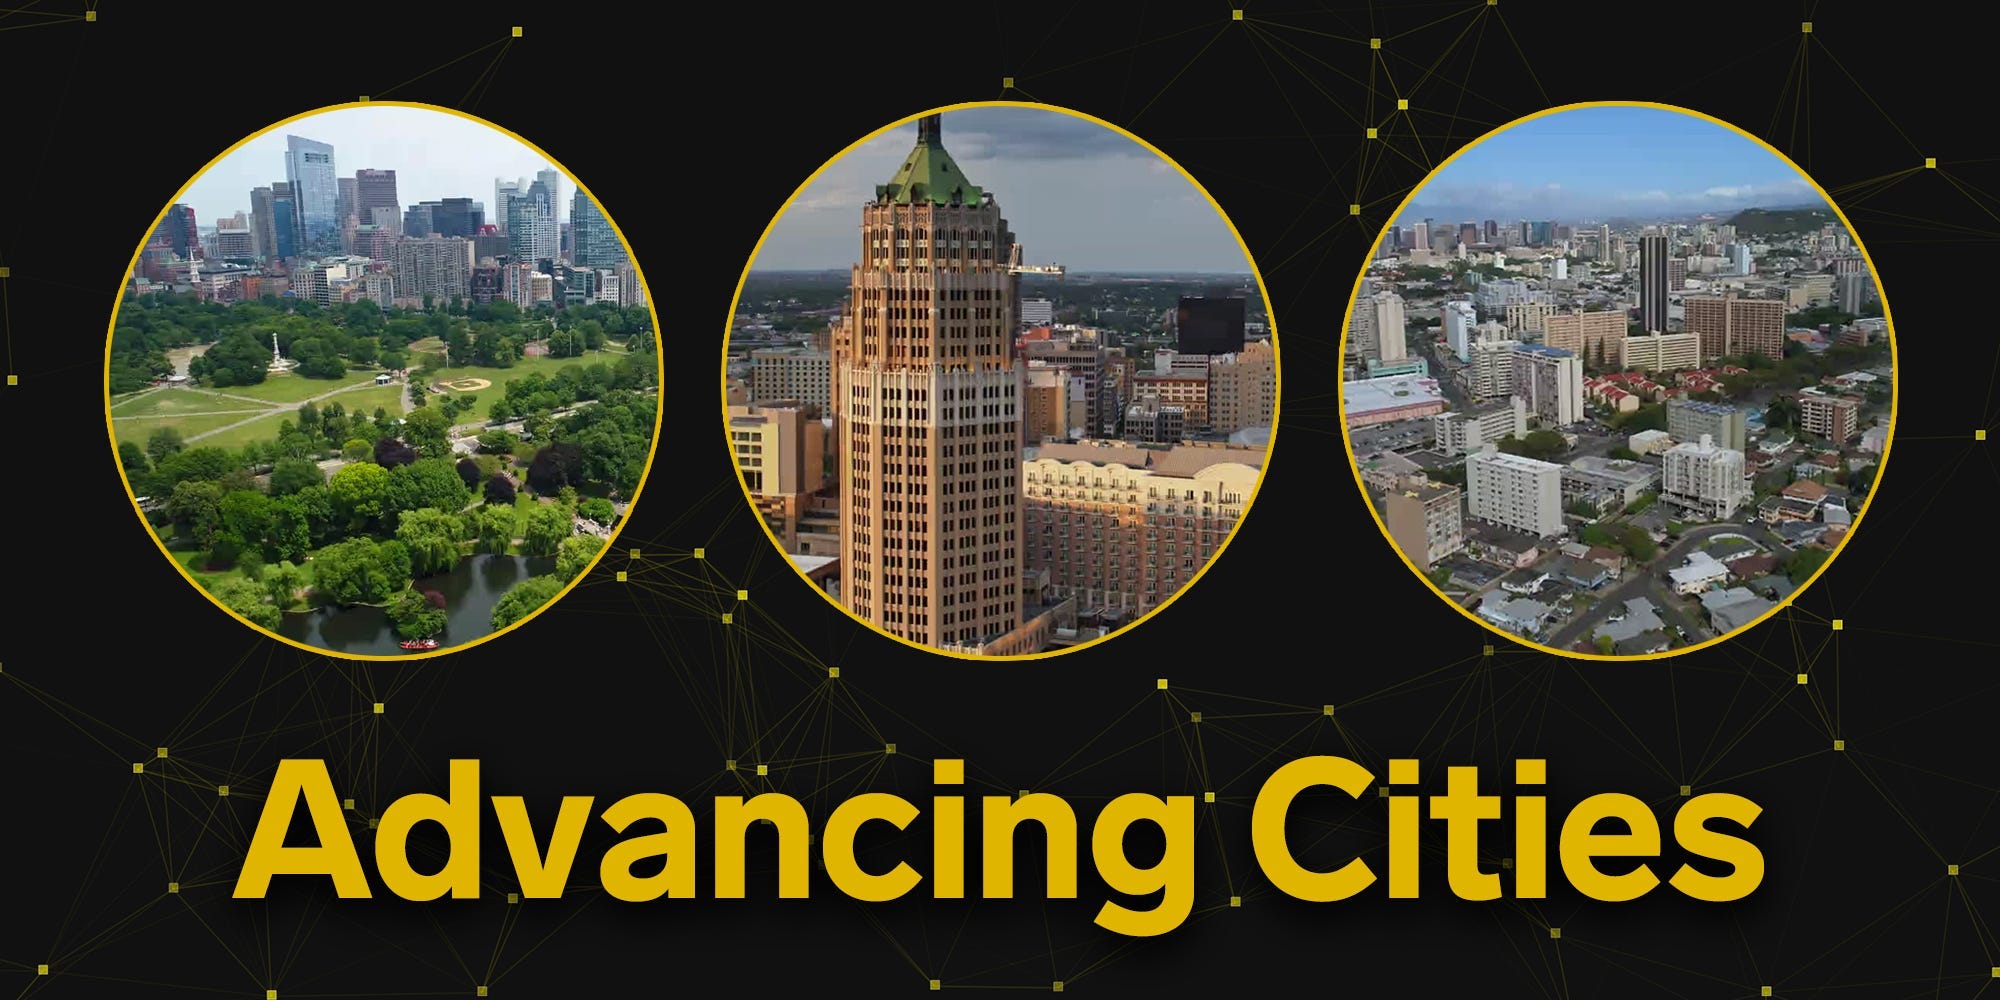 graphic design that has three cutouts of cities and text that reads "advancing cities"